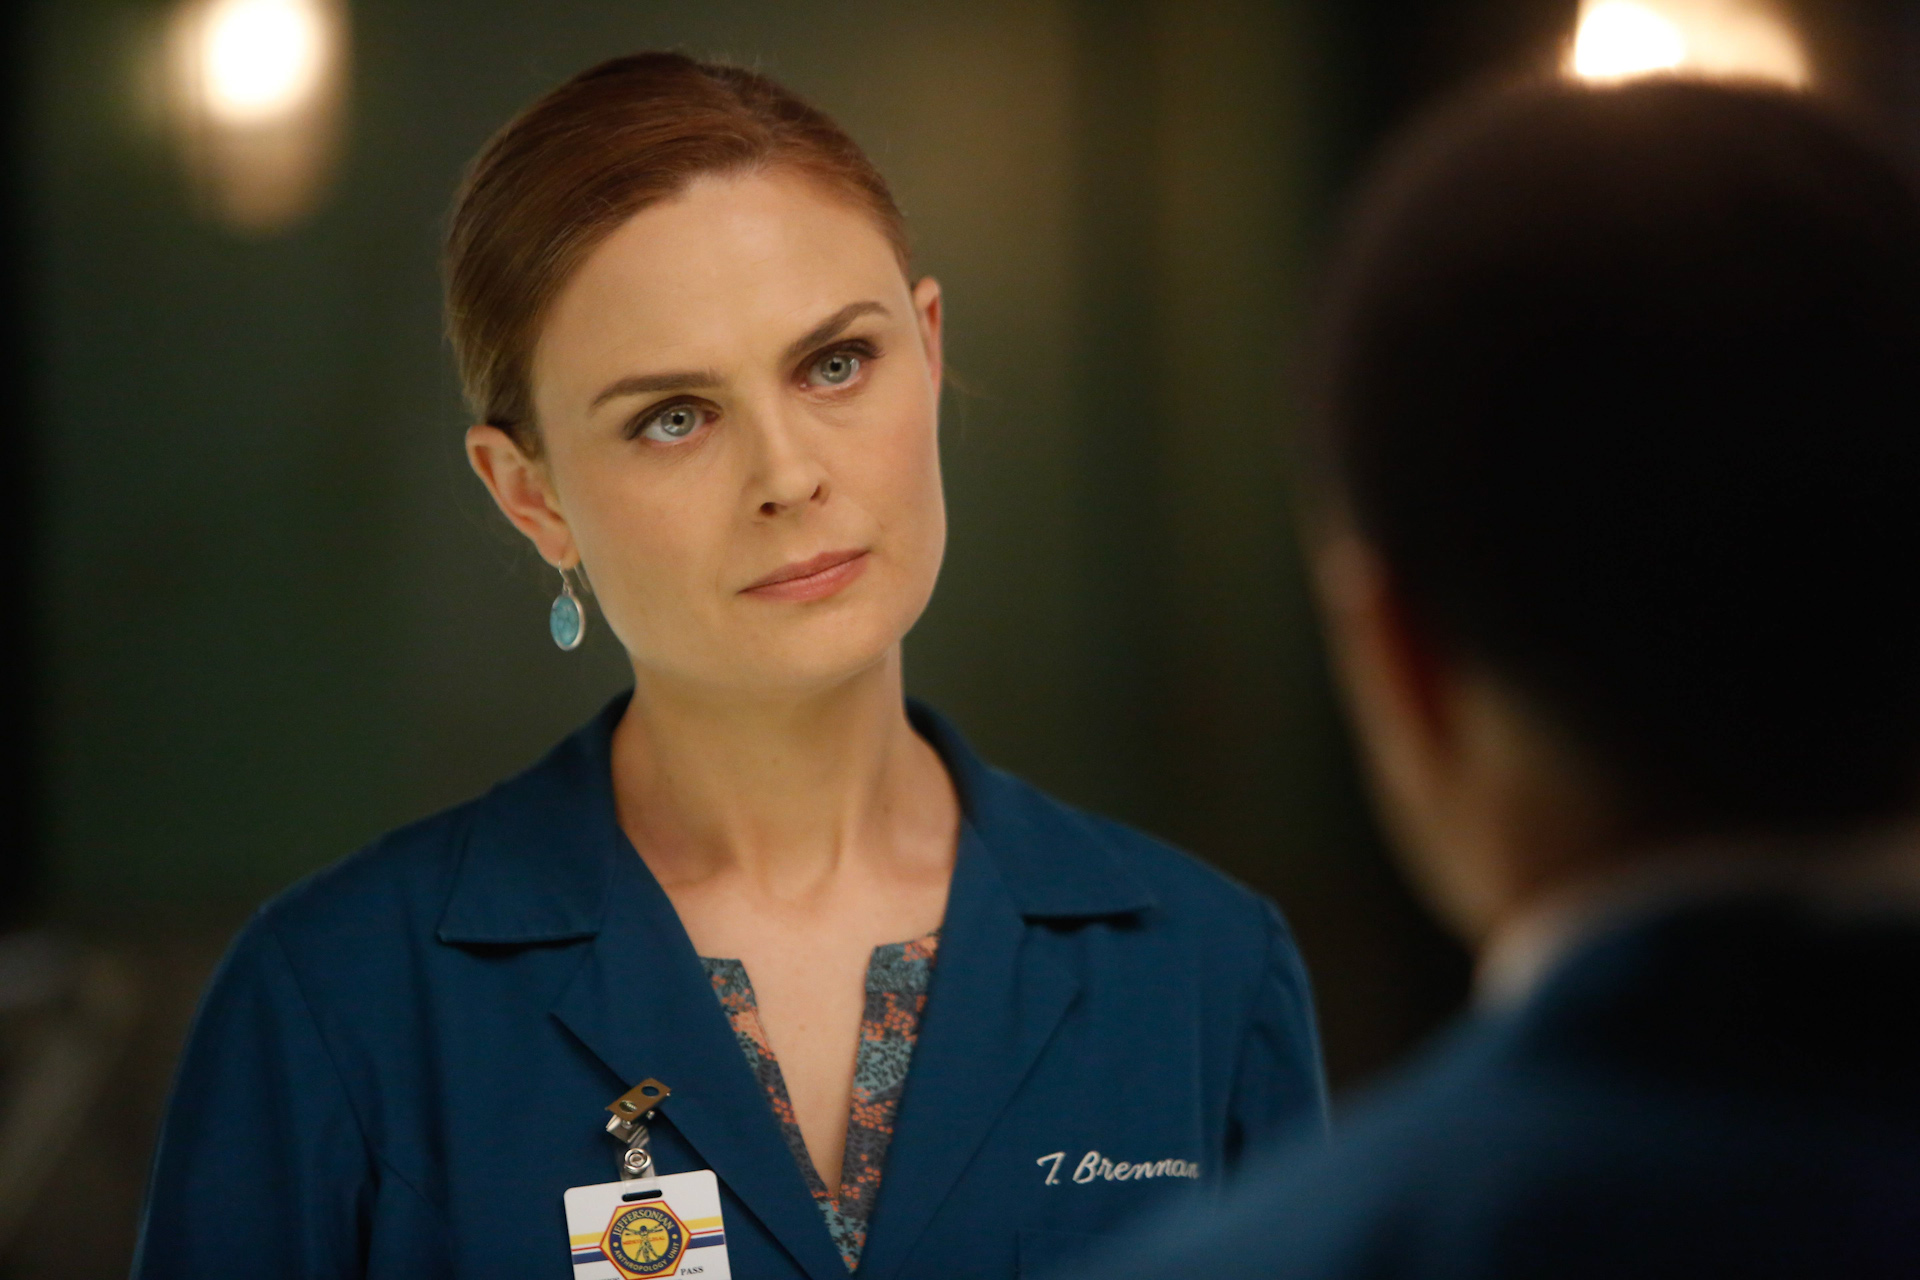 Emily Deschanel has been committed to this for years